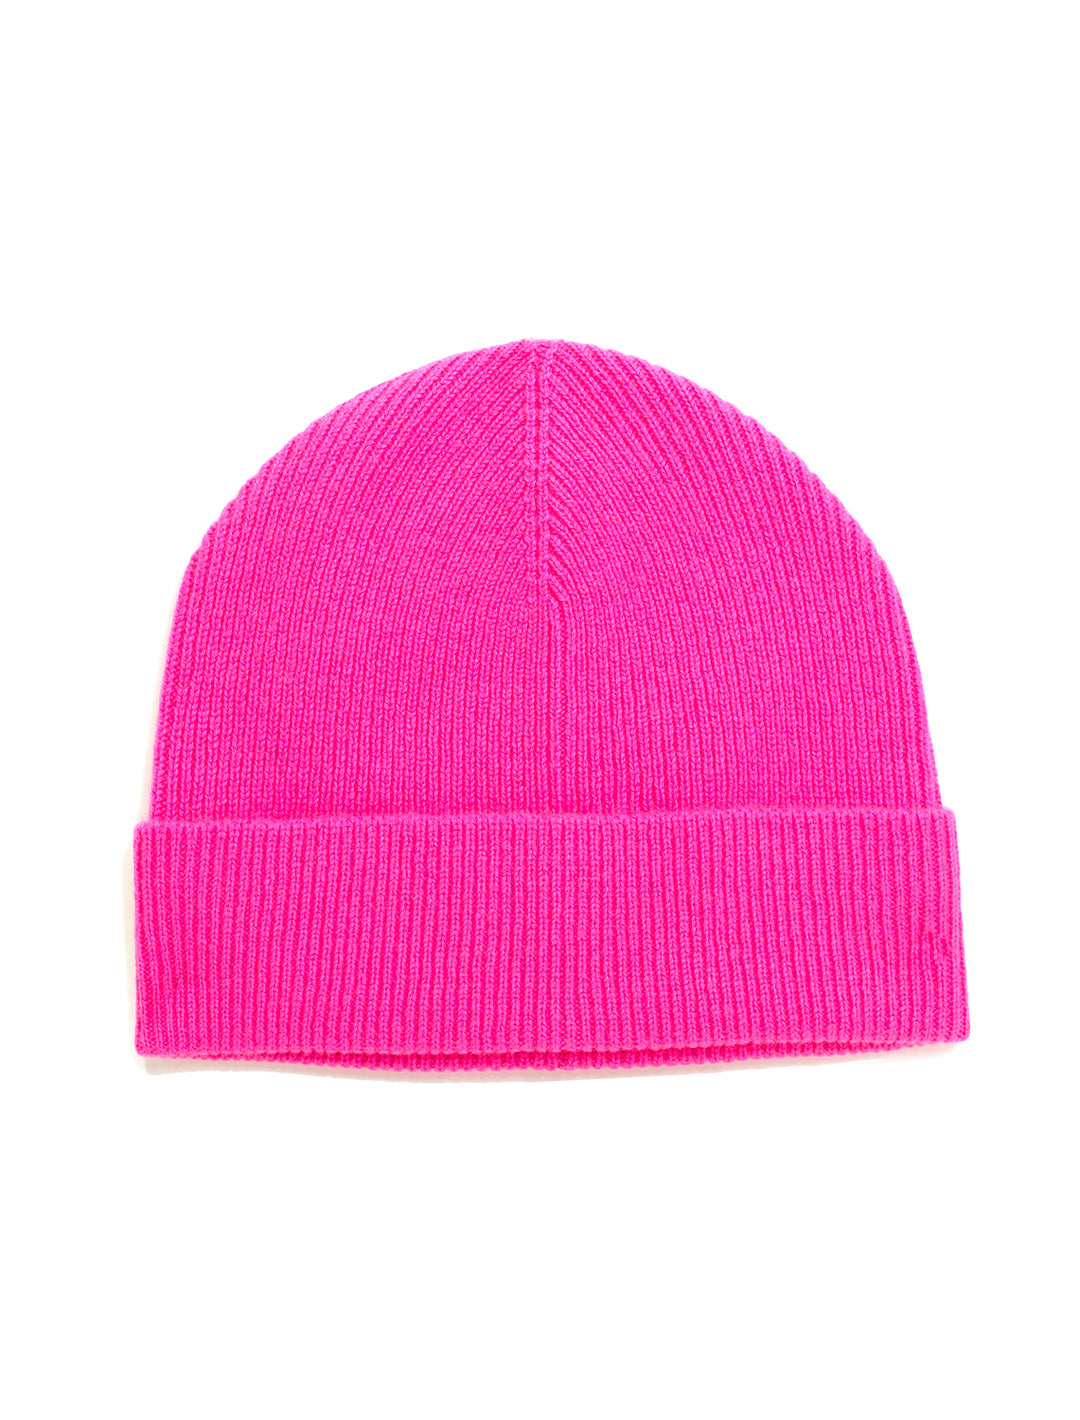 Front view of Jumper 1234's ribbed turnback hat in hot pink.